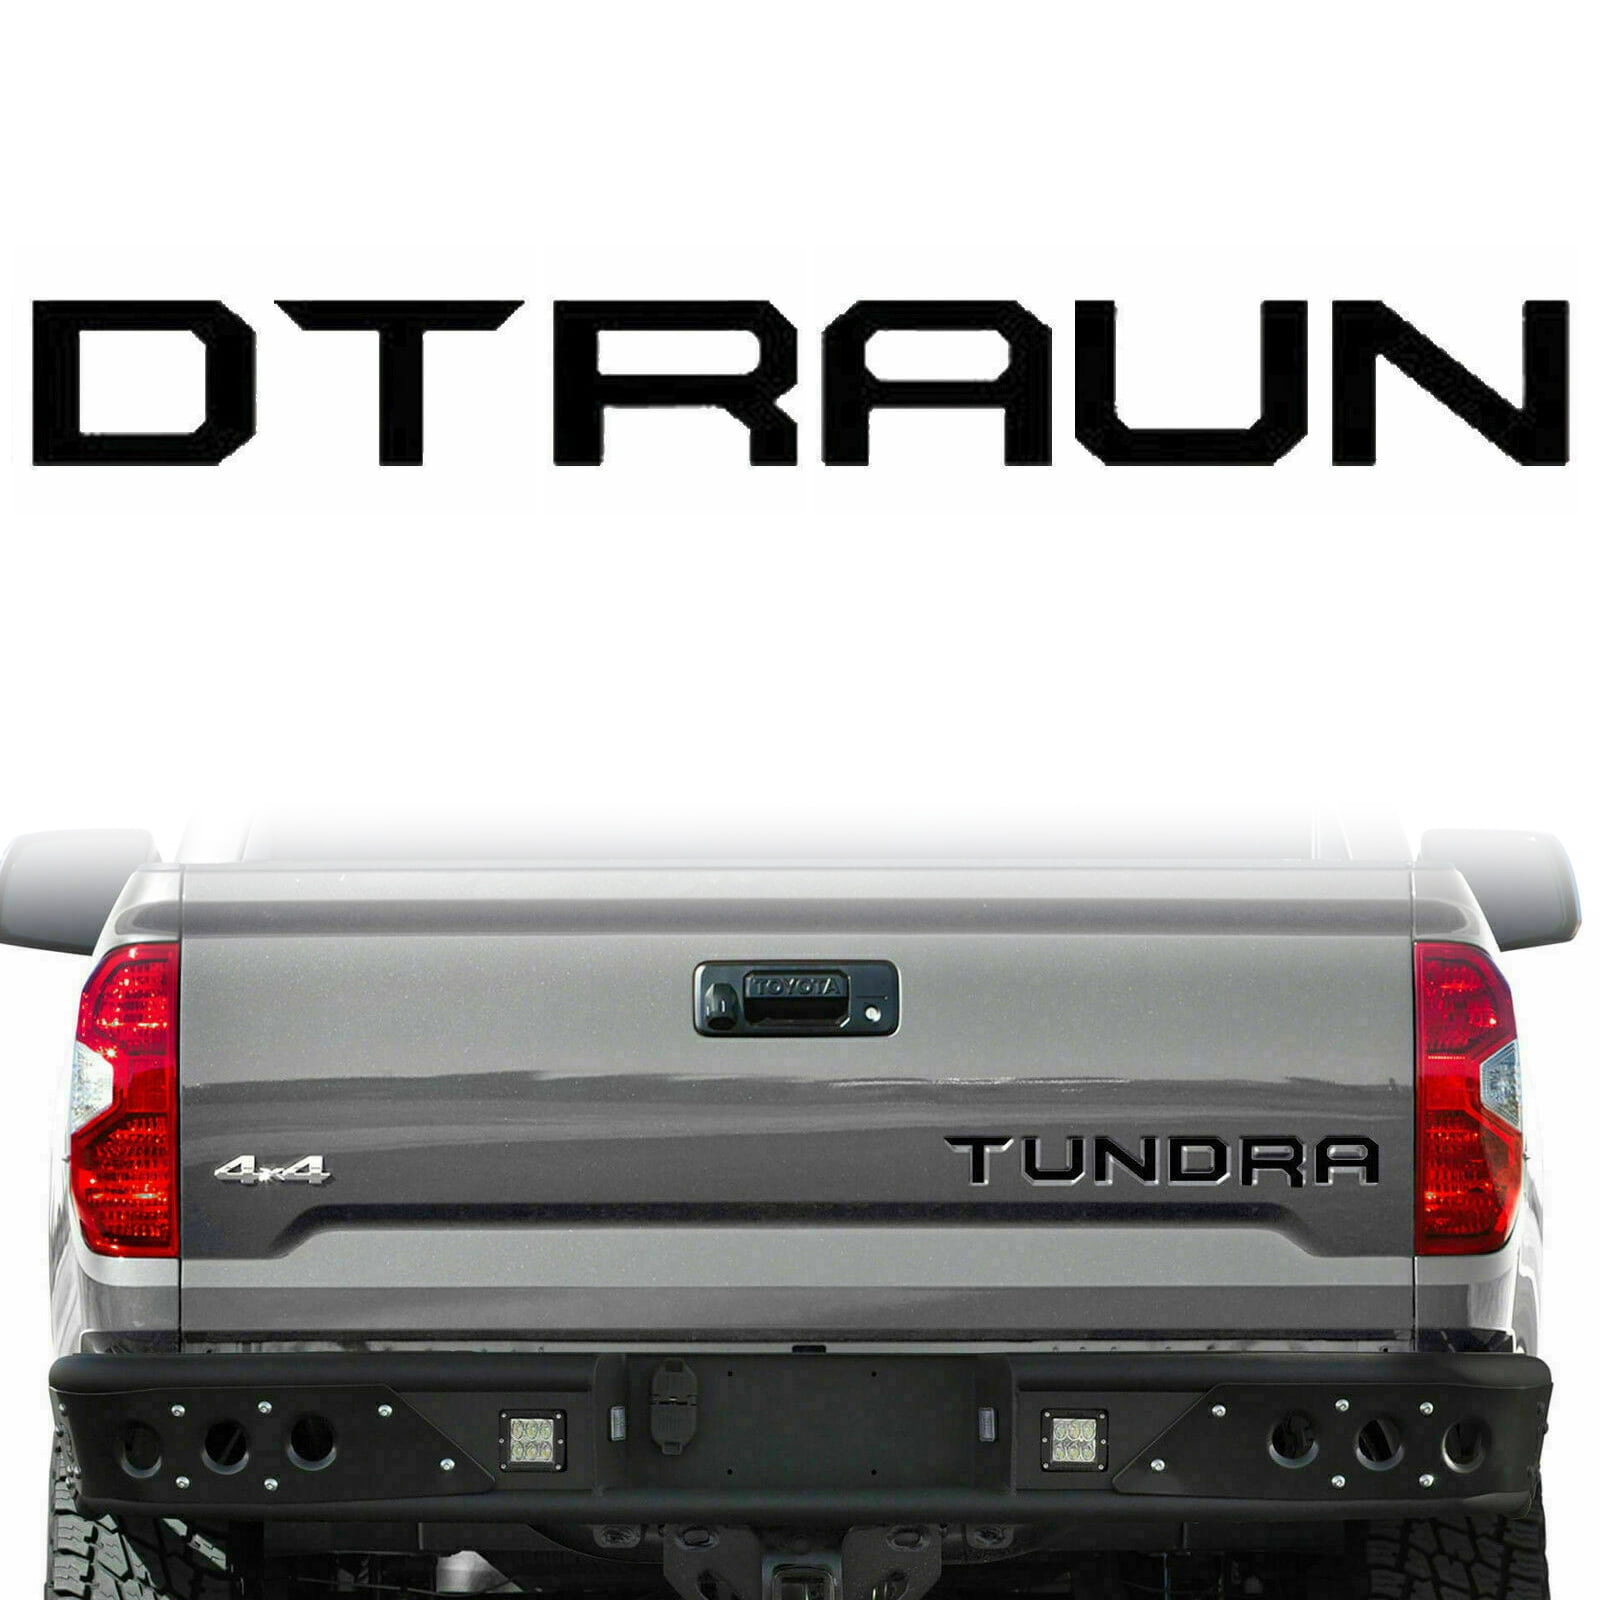 Silver CAR ROVER For Toyota Tundra 2014-2019 Tailgate Insert Letters